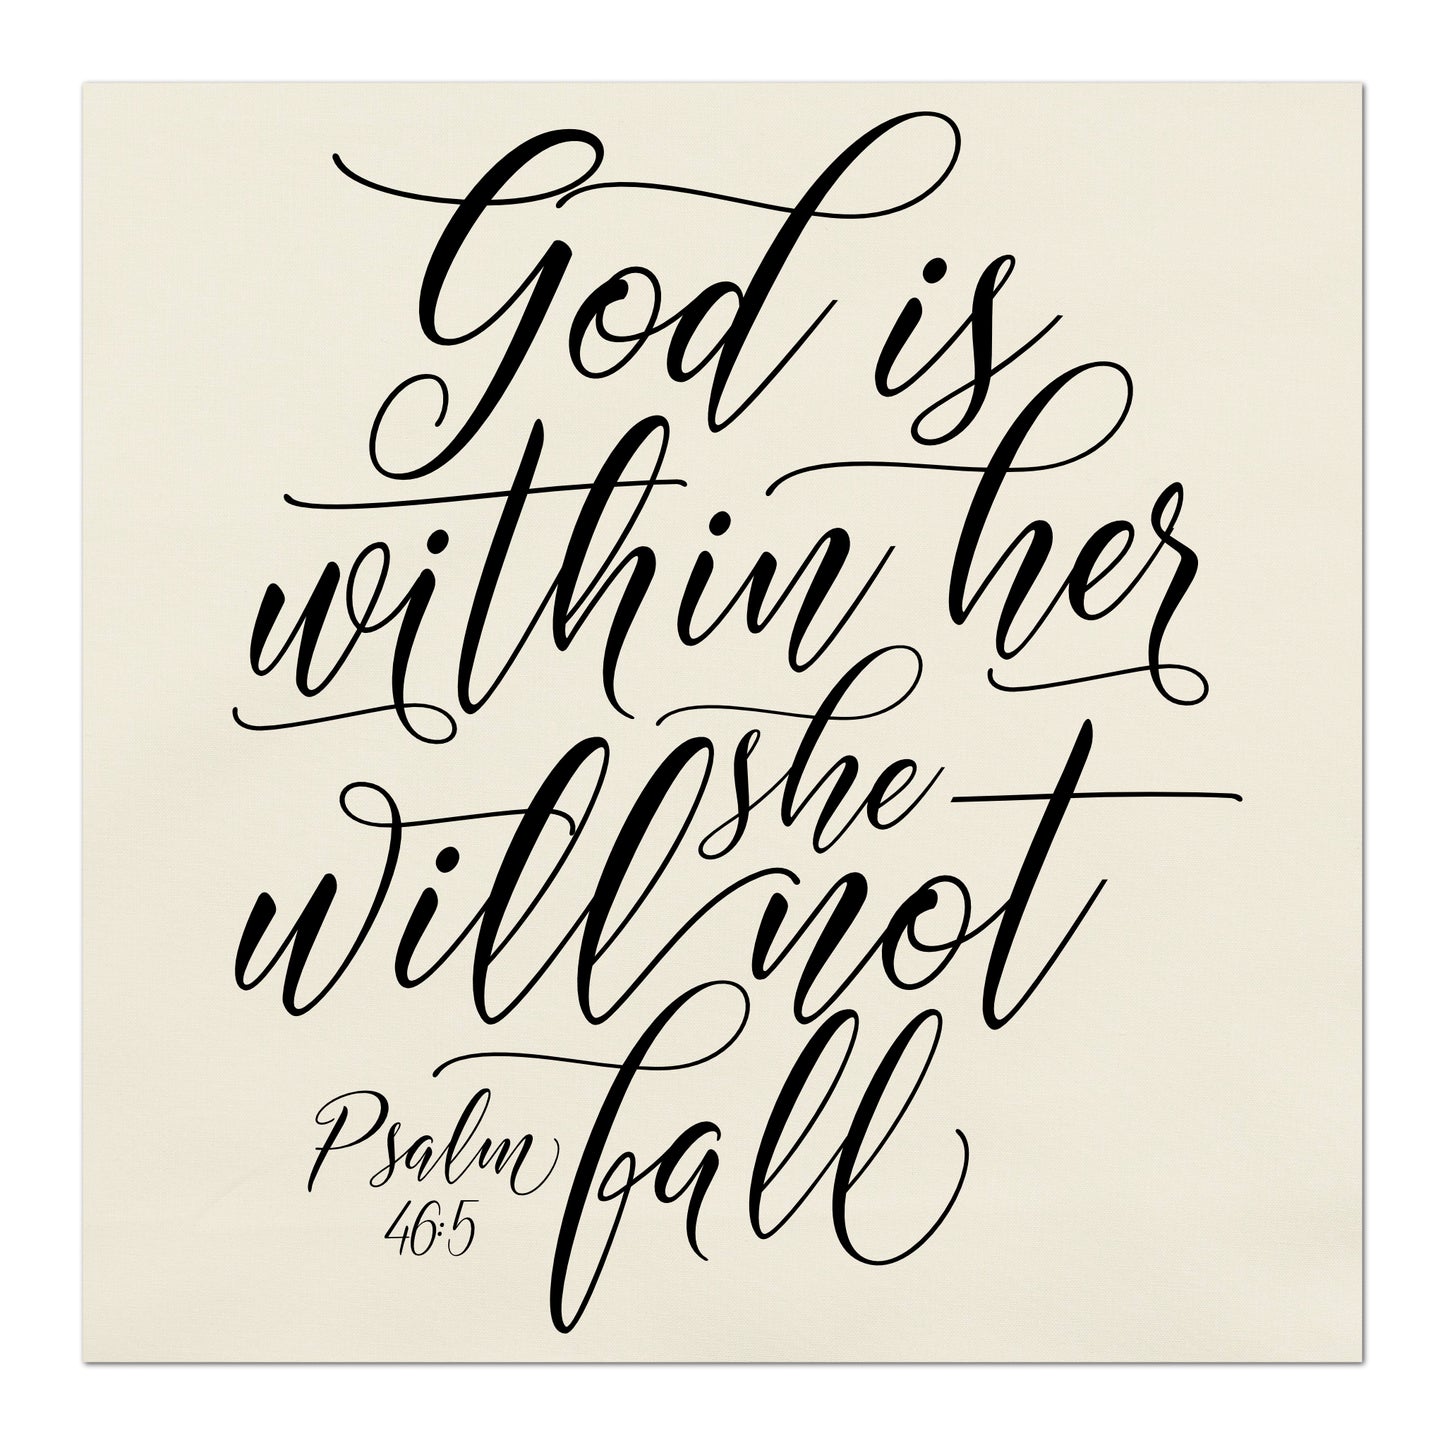 God is within her she will not fall - Psalm 46 5 - Fabric Panel Print, Scripture Fabric, Bible Verse Wall Art